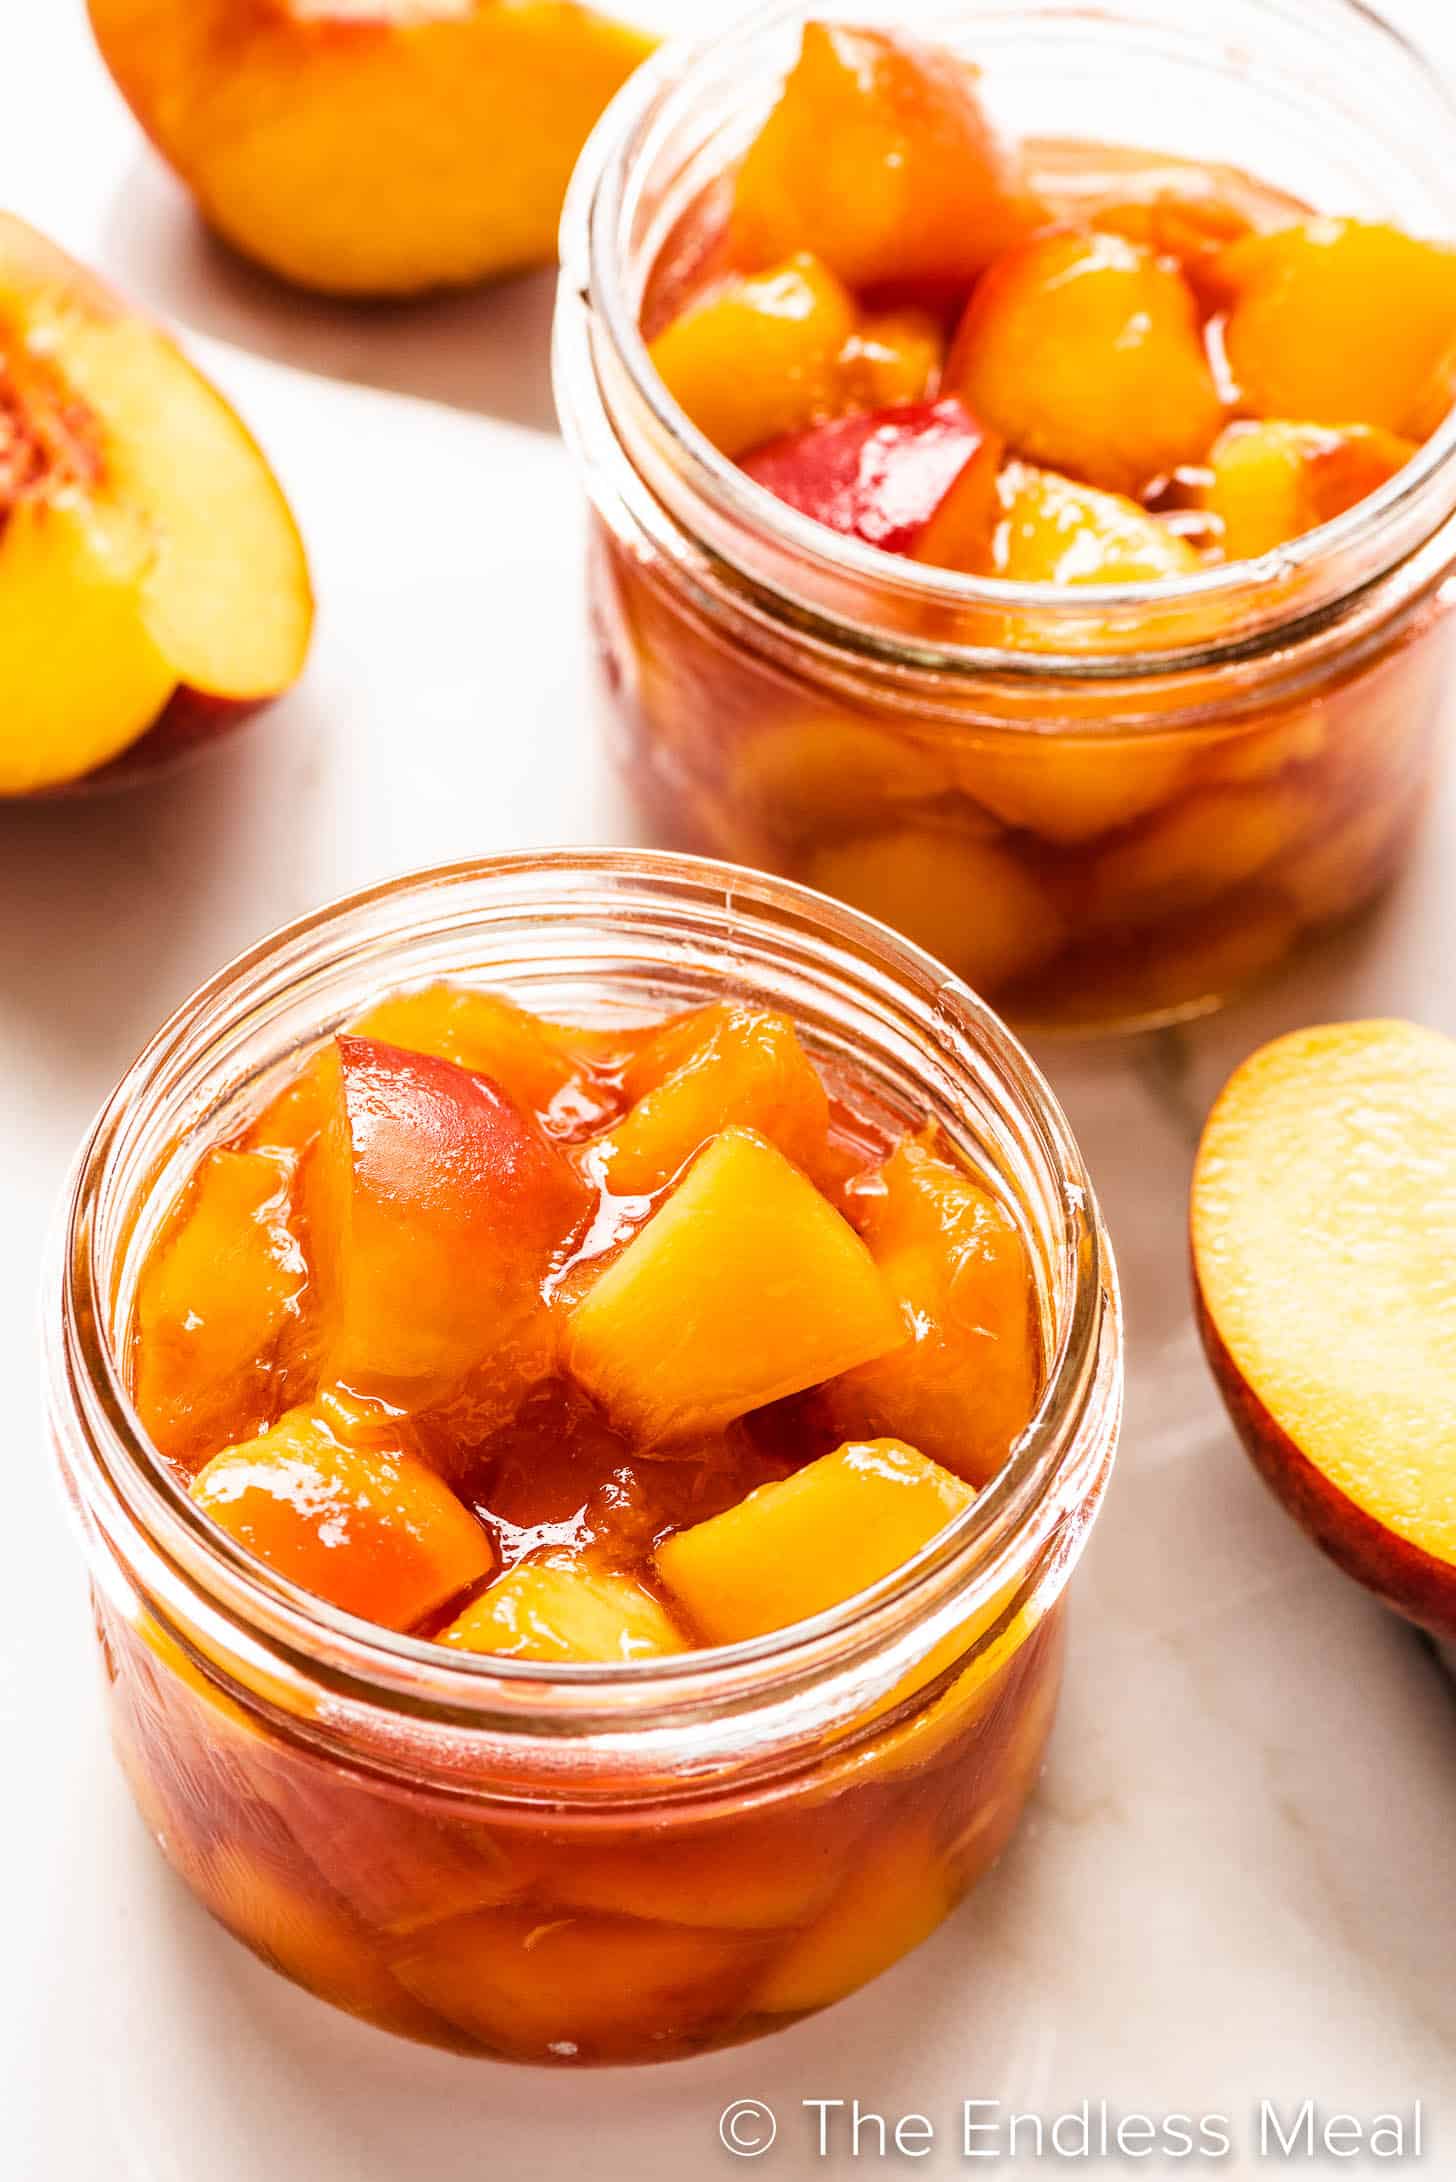 2 cans of peaches cooked in maple syrup